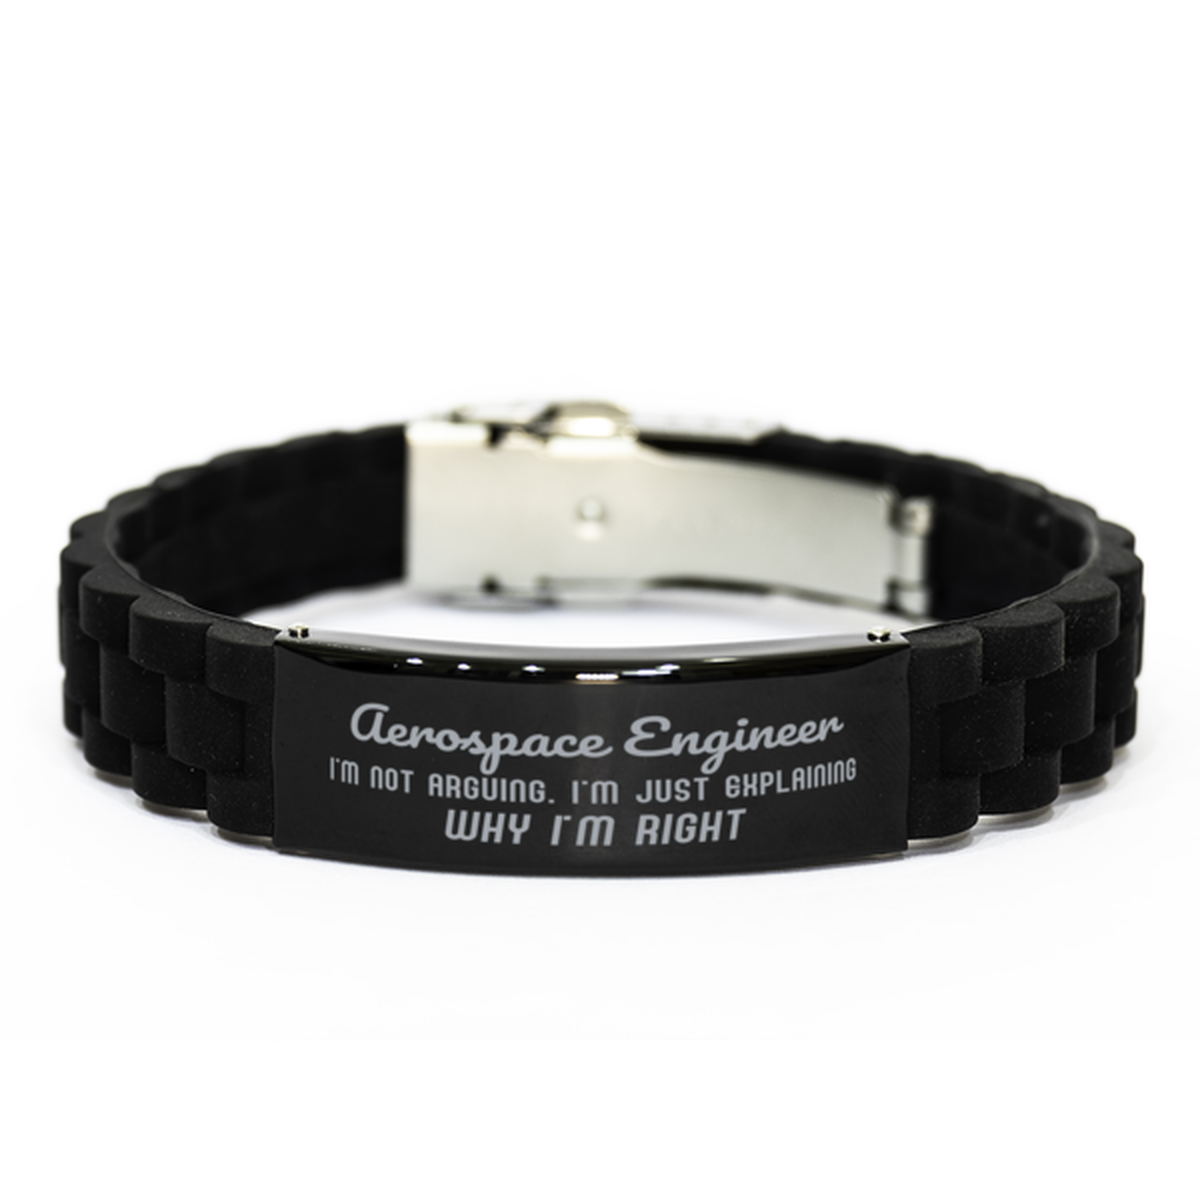 Aerospace Engineer I'm not Arguing. I'm Just Explaining Why I'm RIGHT Black Glidelock Clasp Bracelet, Funny Saying Quote Aerospace Engineer Gifts For Aerospace Engineer Graduation Birthday Christmas Gifts for Men Women Coworker